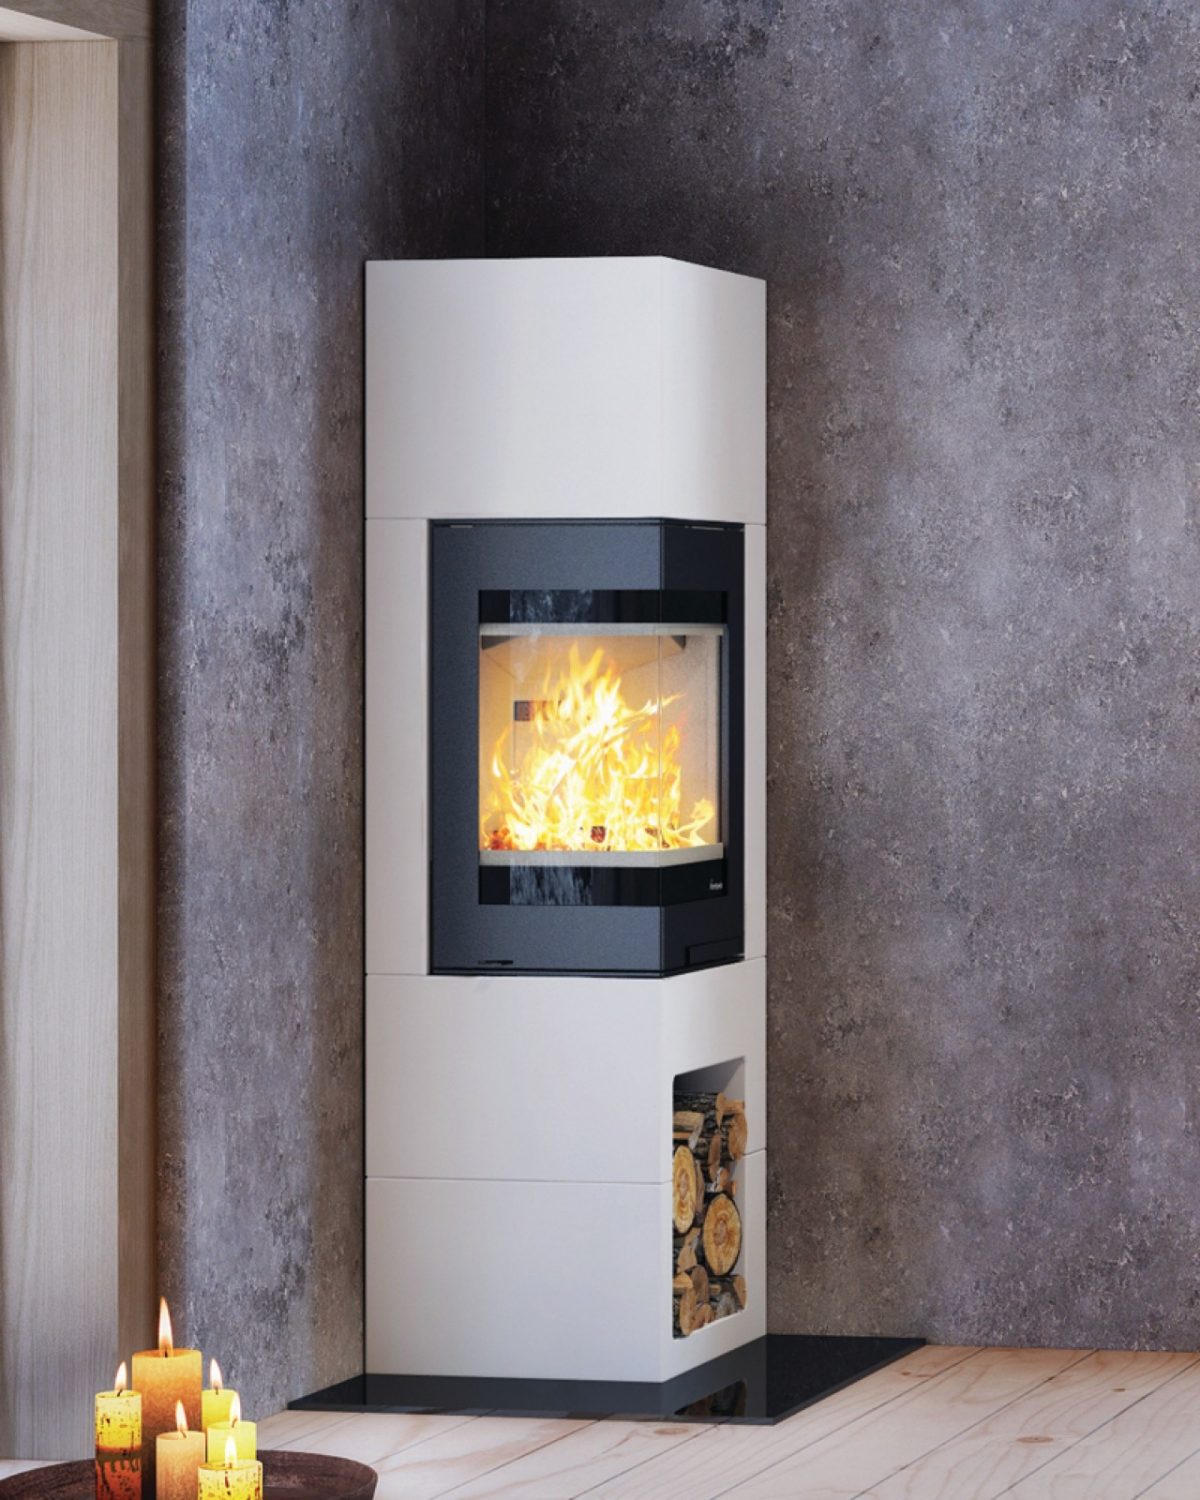 Nordpeis Odense Surround, complete with Nordpeis S-31A Wood Burning Inset Fire